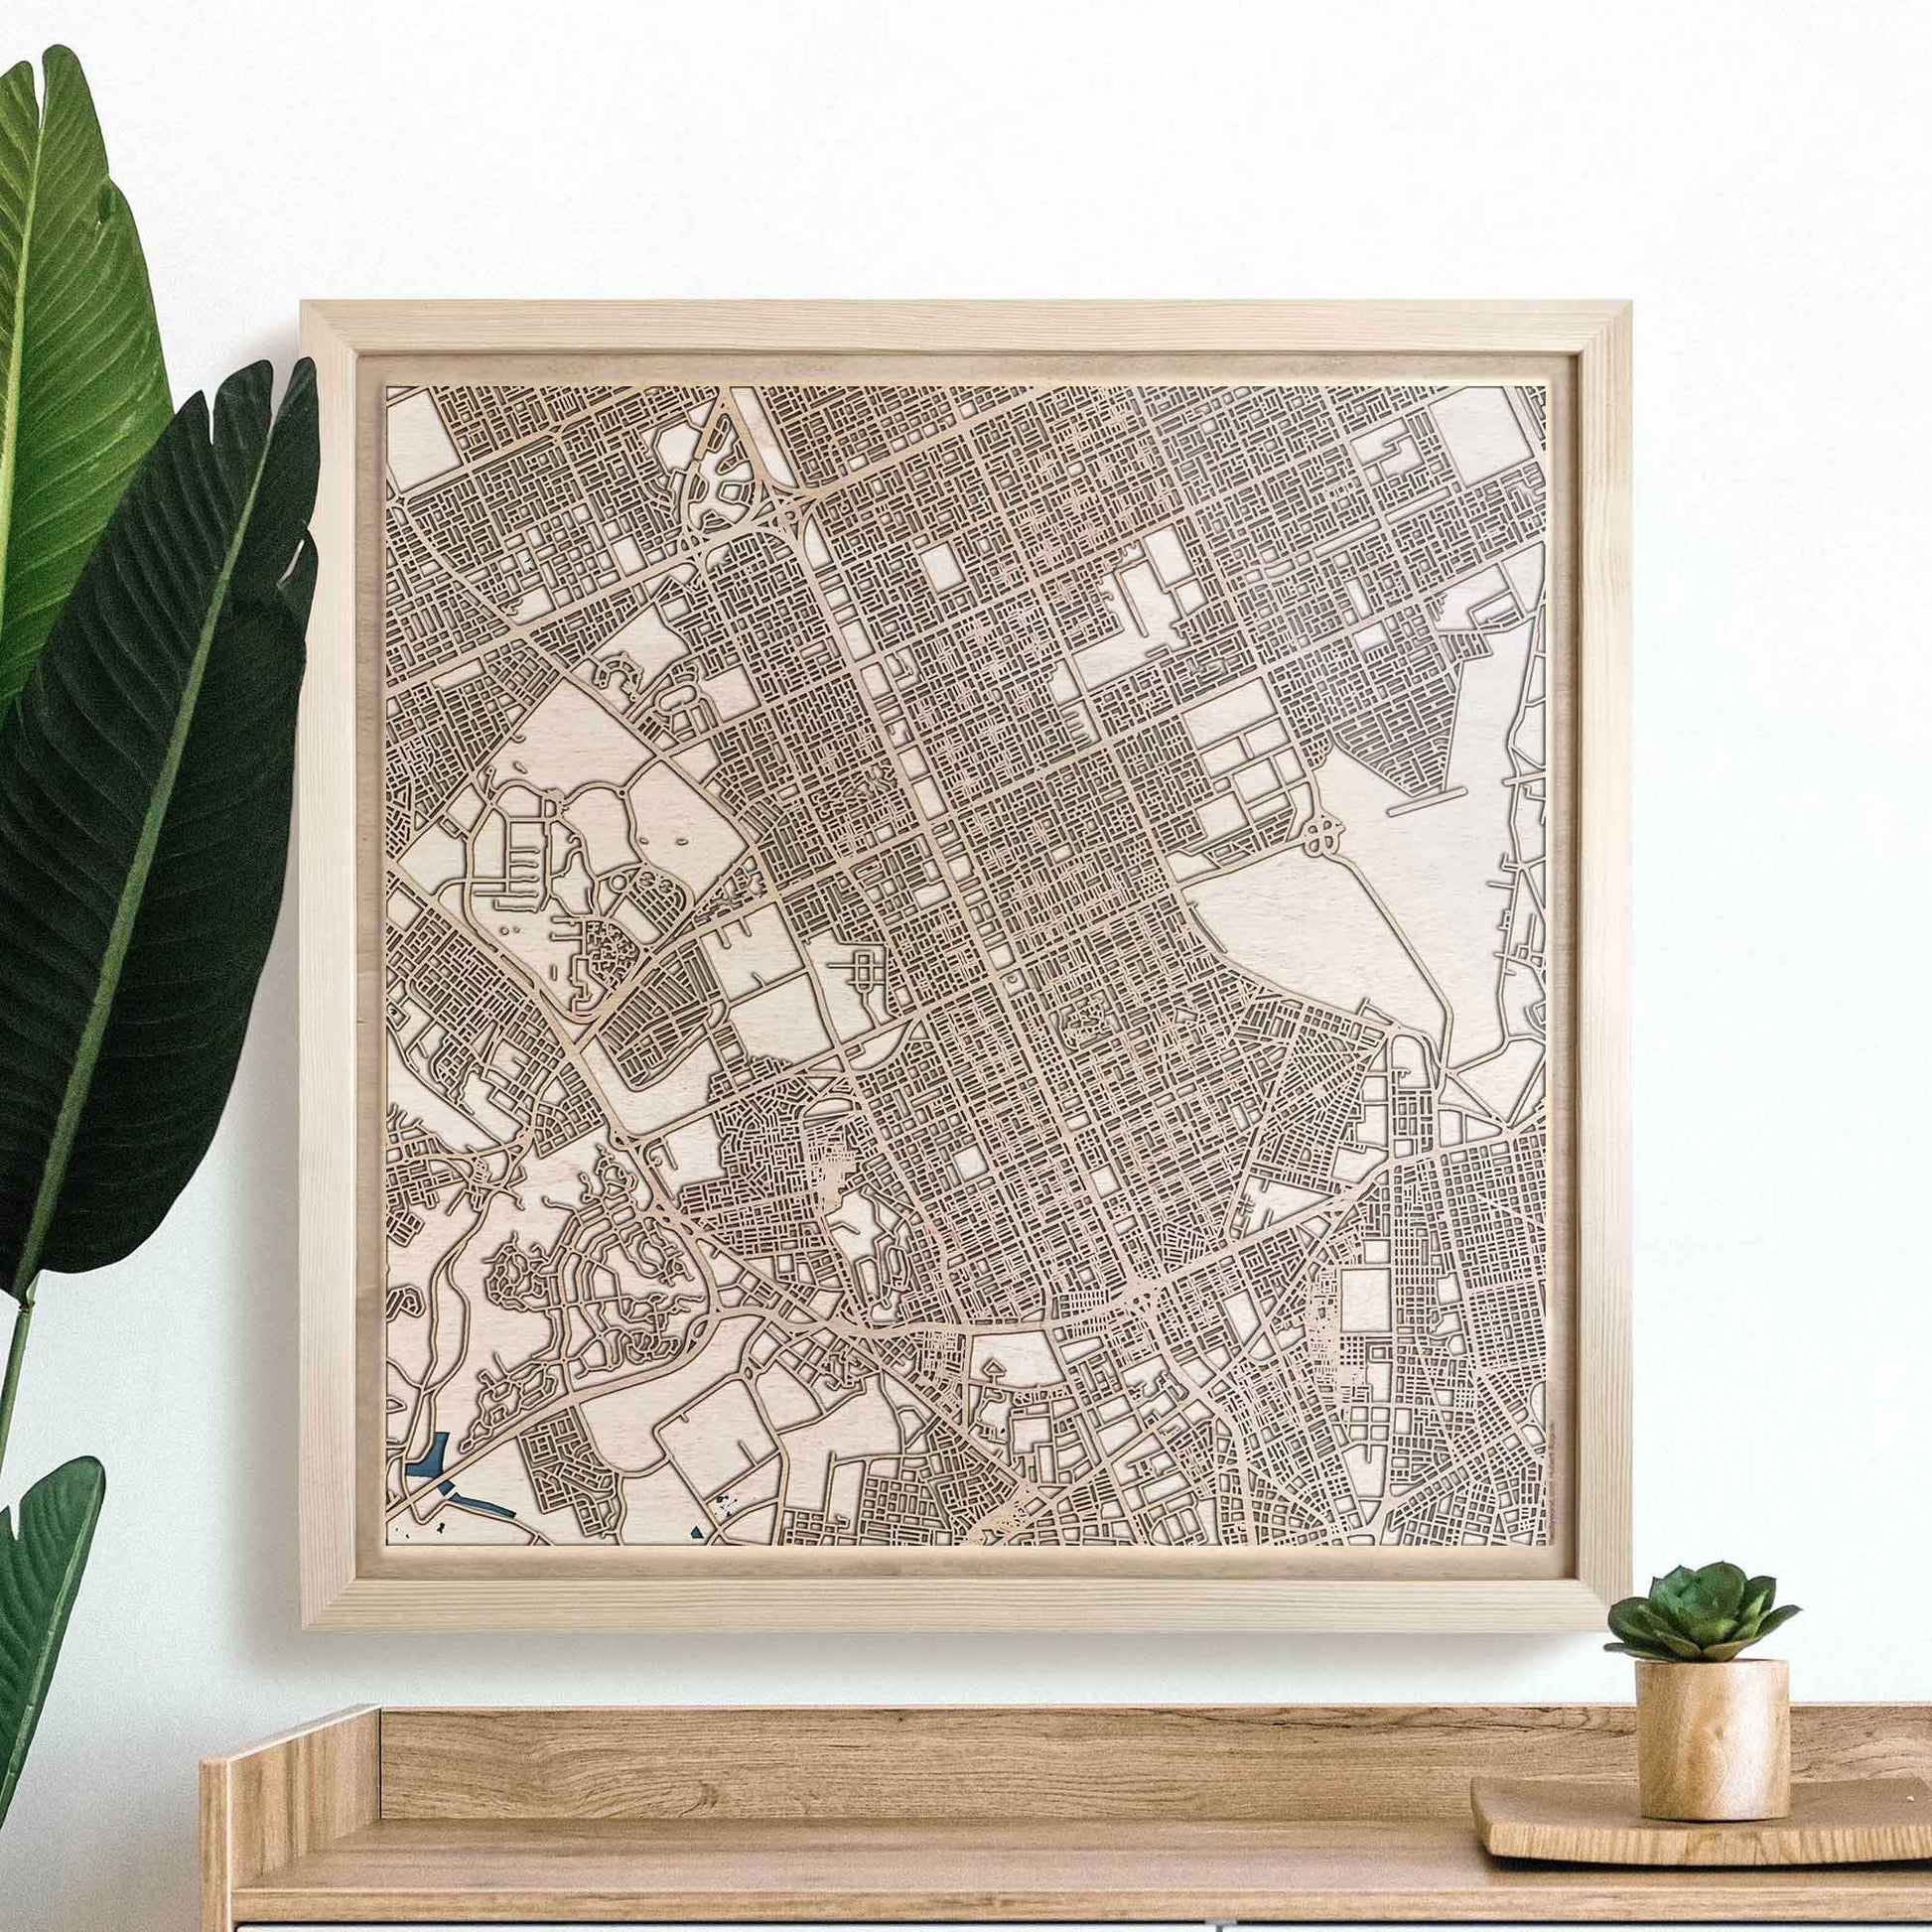 Riyadh Wooden Map by CityWood - Custom Wood Map Art - Unique Laser Cut Engraved - Anniversary Gift